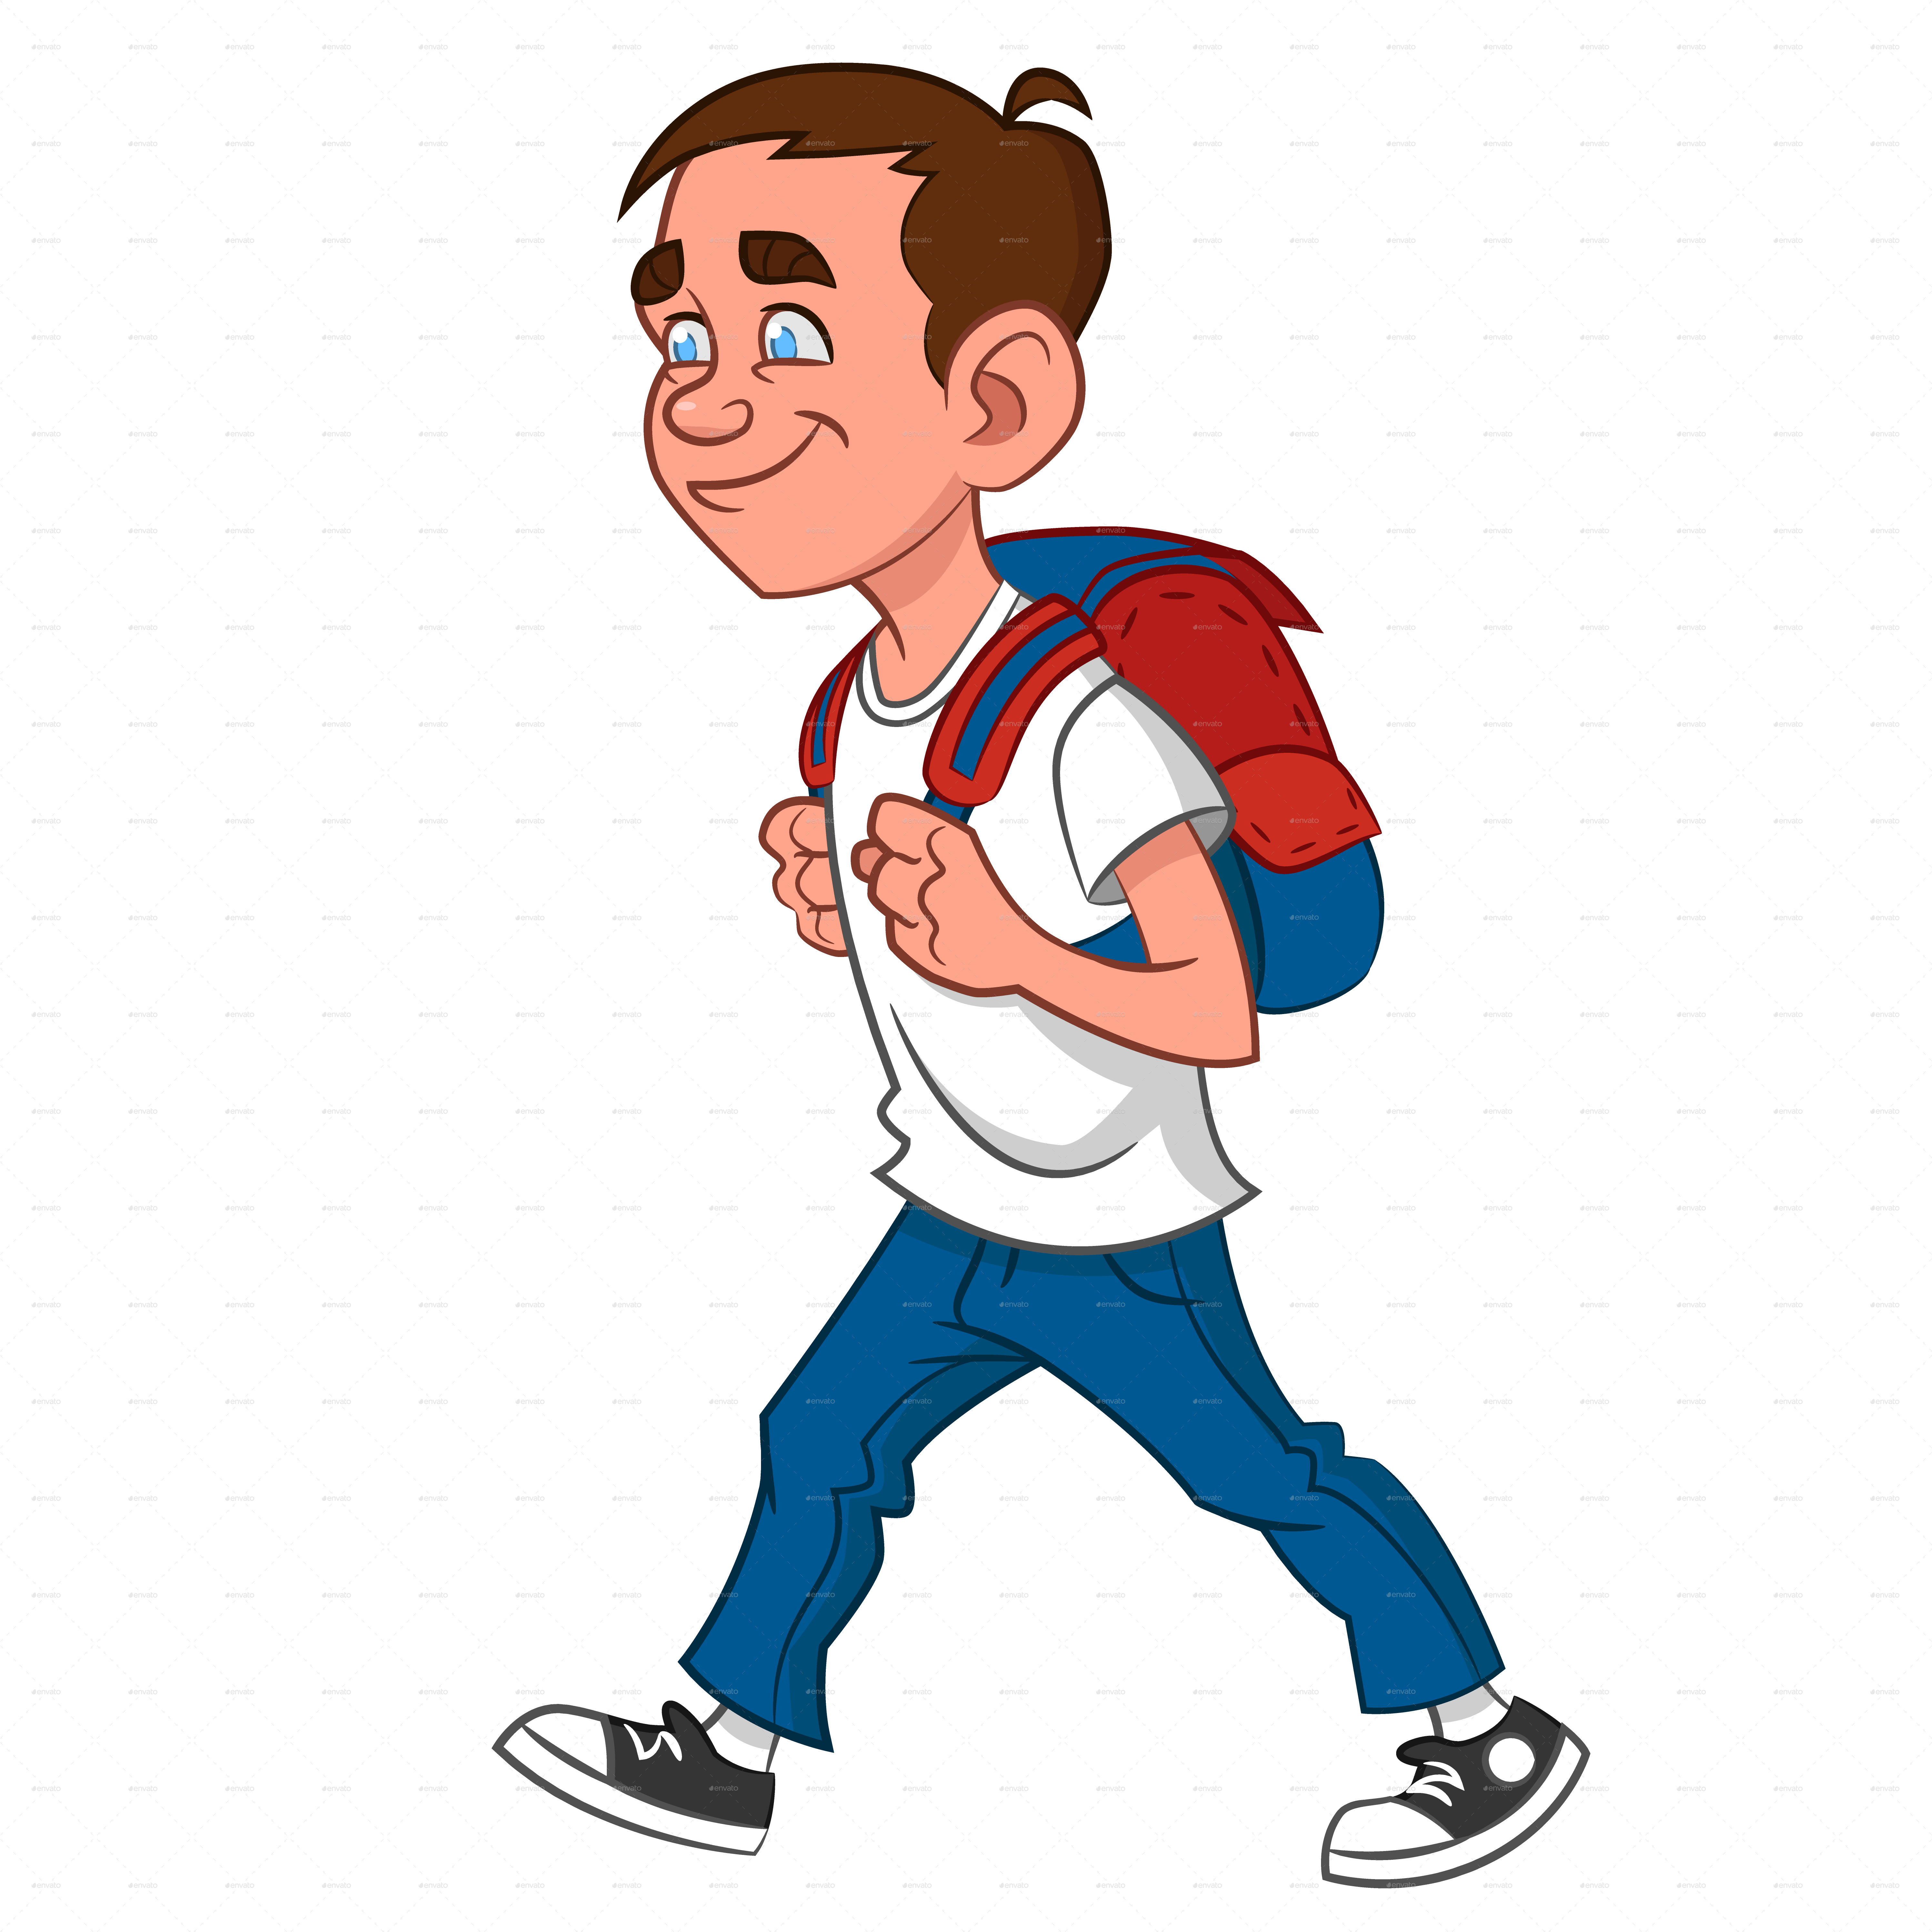 Cartoon Boy PNG Images Transparent Background | PNG Play